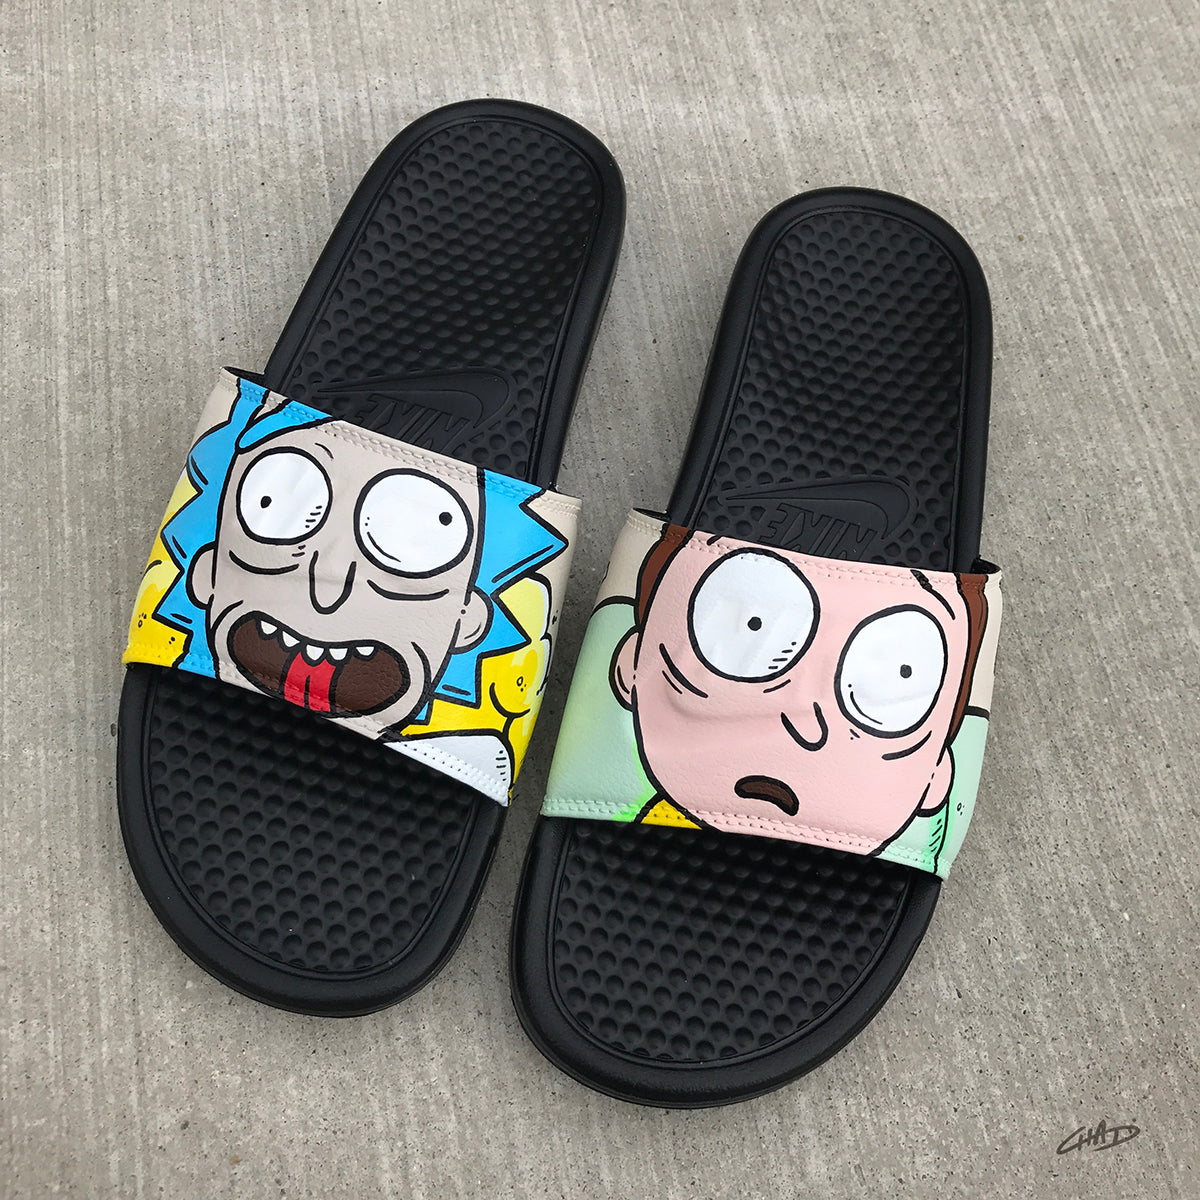 Rick and Morty Themed Hand Painted Nike Slides aka Sandals, Flip Flops